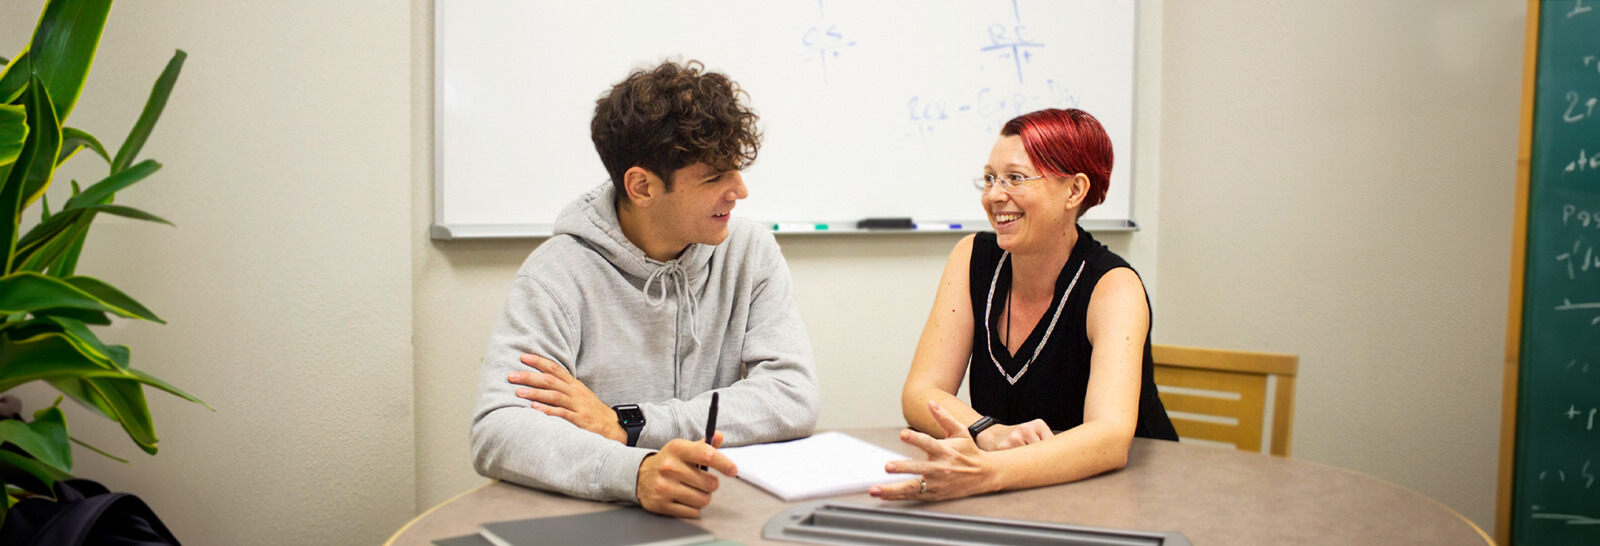 Samantha Overton teaches a student at Pima's West Campus.